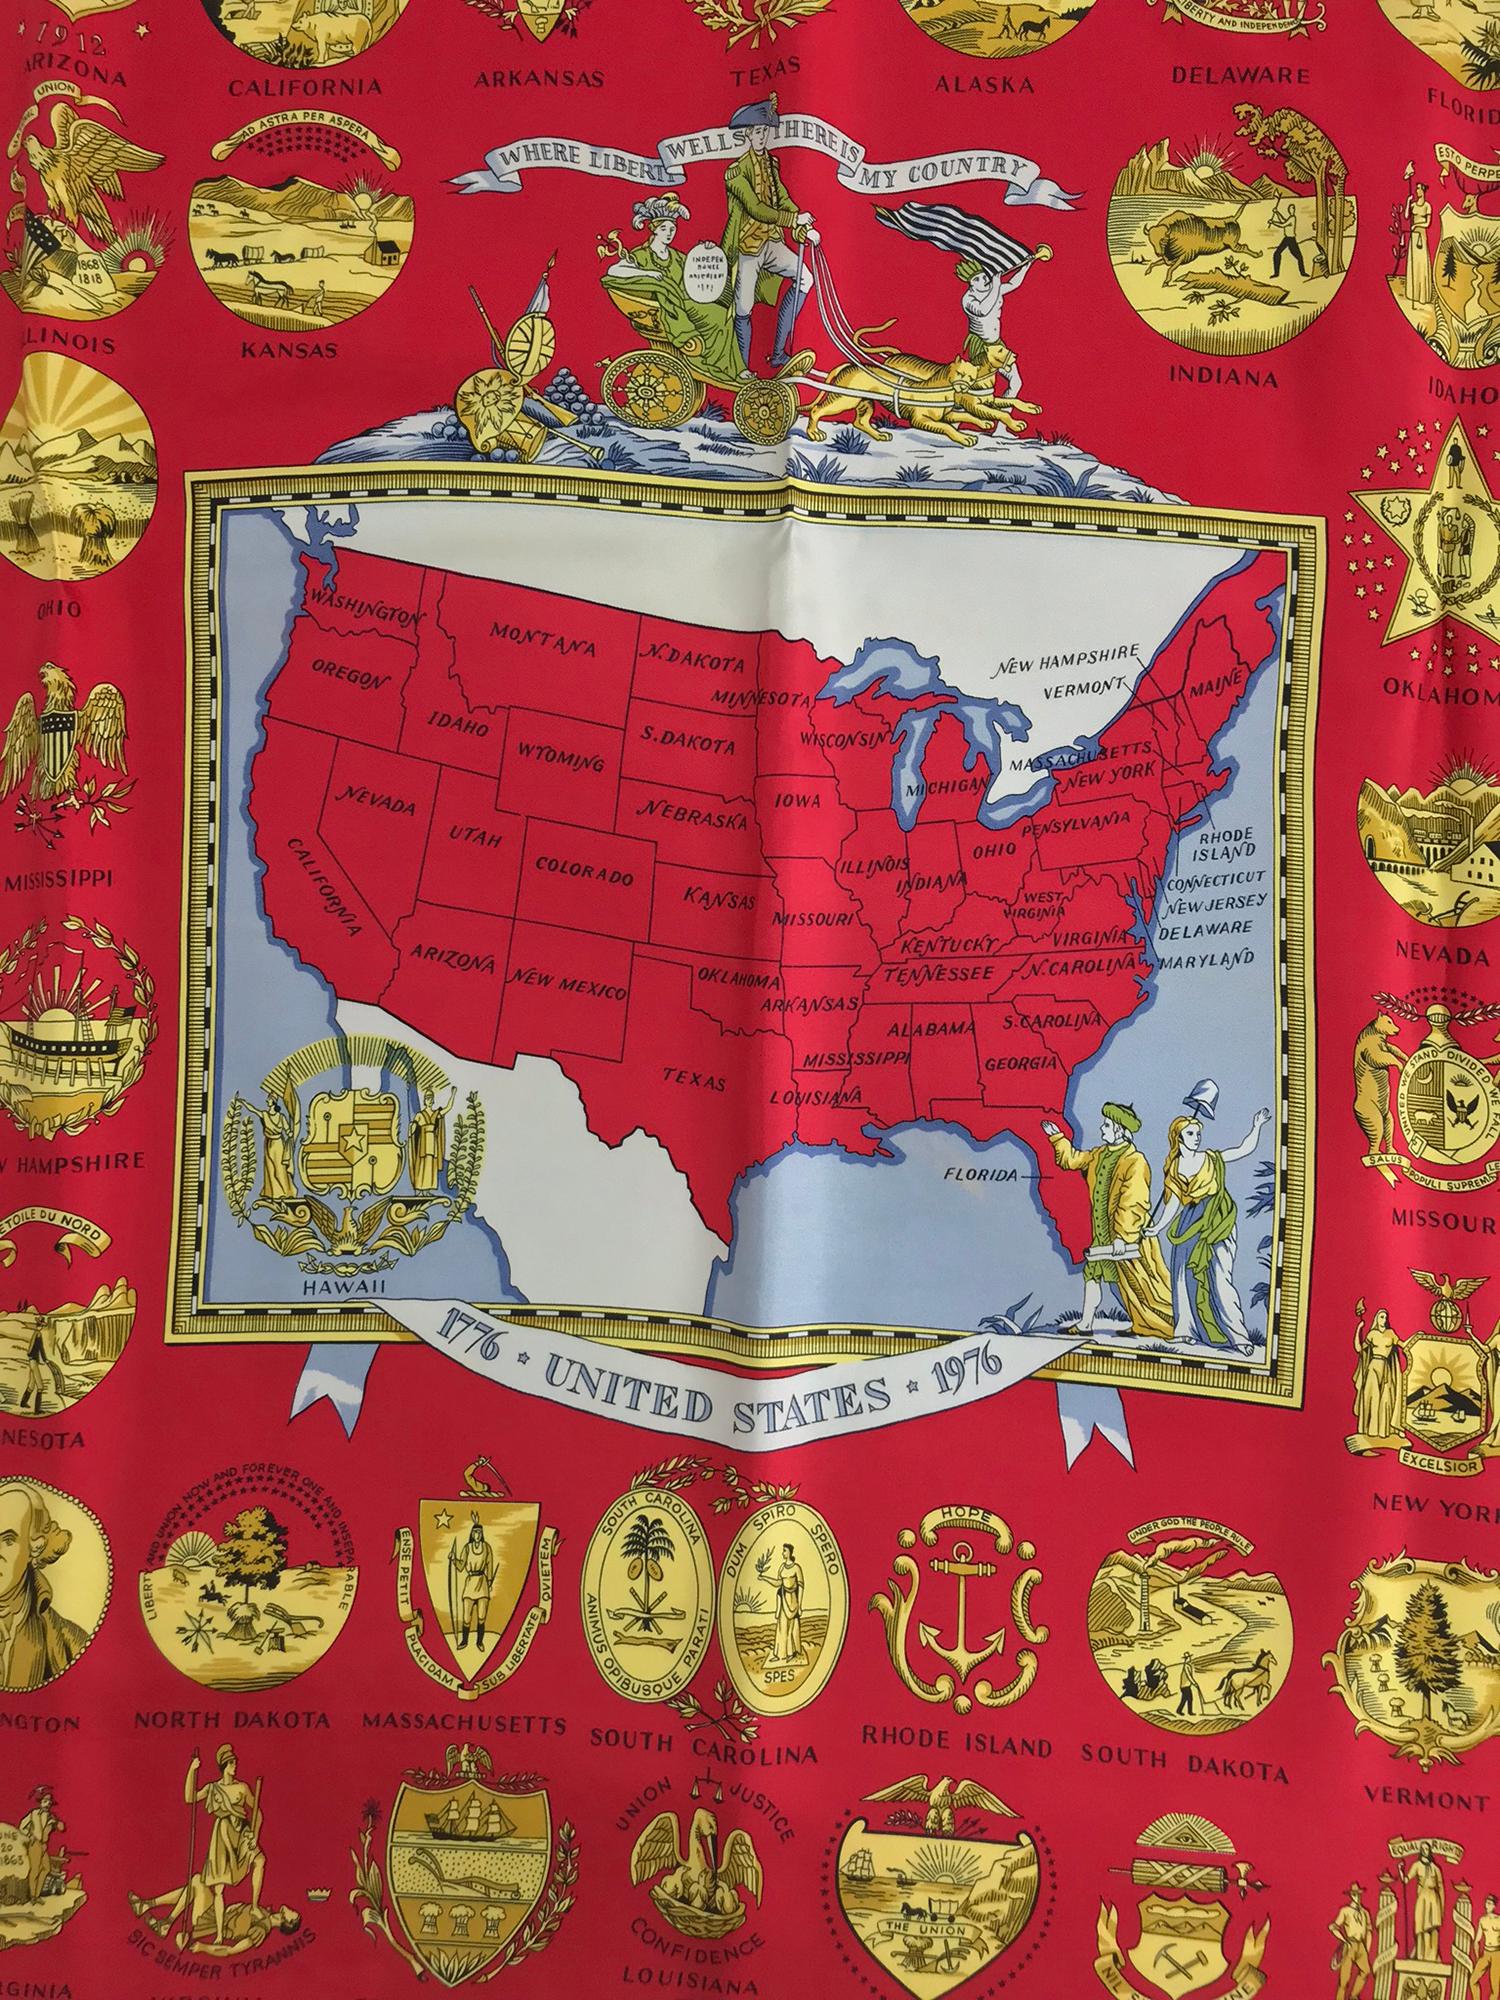 Hermes Bicentennial silk twill scarf designed by Hugo Grygkar 1976 Rare. In honour of the United States bicentennial 1776-1976, Hermes issued this beautiful scarf, this version in Red, white and blue with a map of the United States at the center